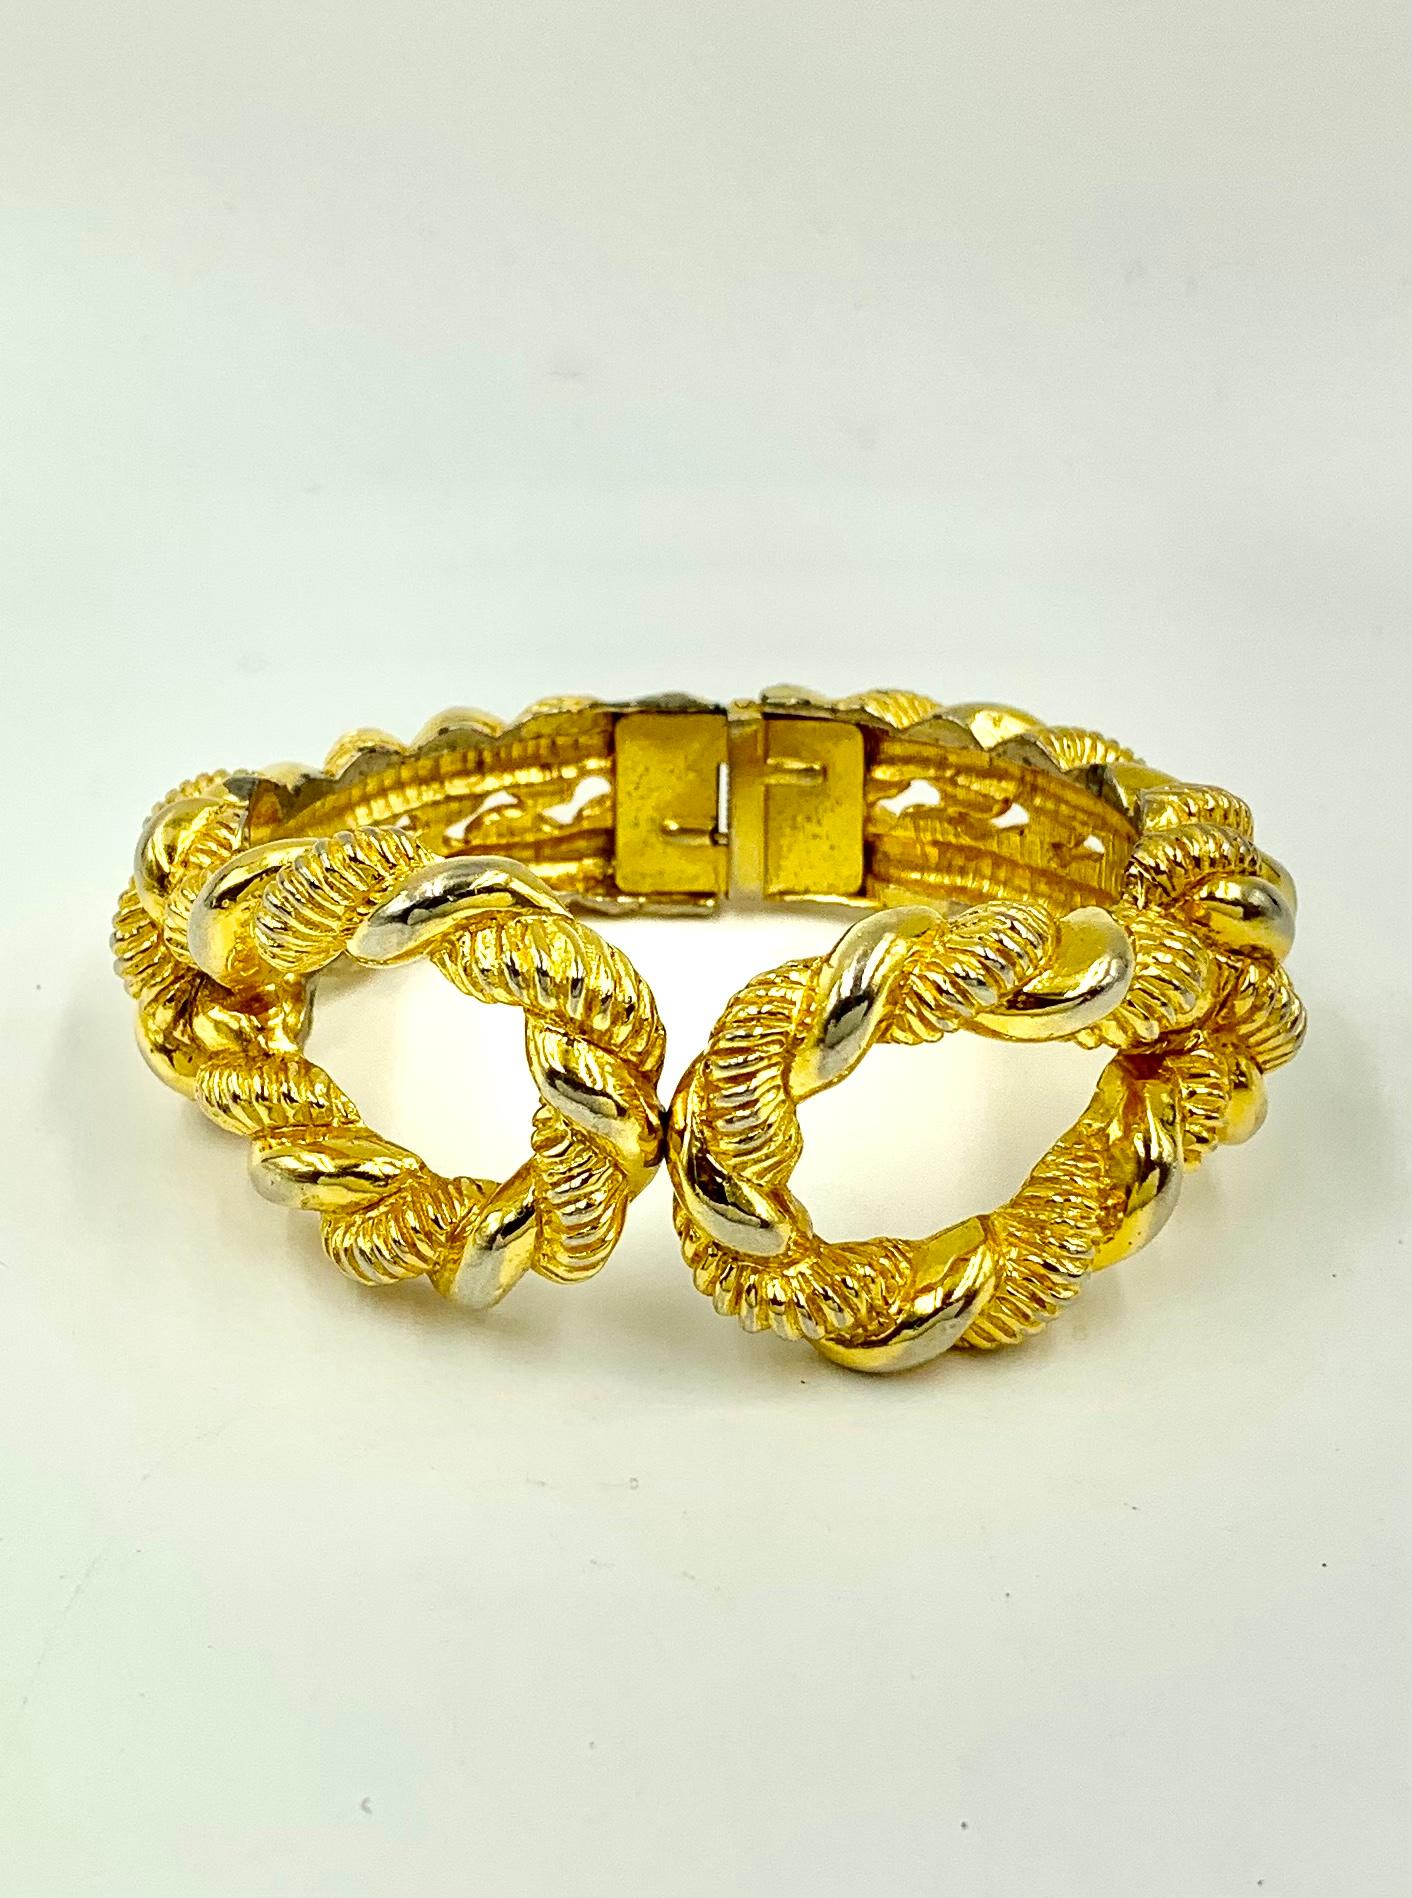 Bold, large vintage KJL nautical knot rope twist cuff bracelet. 
Spring opening
Signed KJL
From the collection of an East Hampton socialite, daughter of a former Ambassador to the US
Great condition, wear commensurate with age
Interior diameter